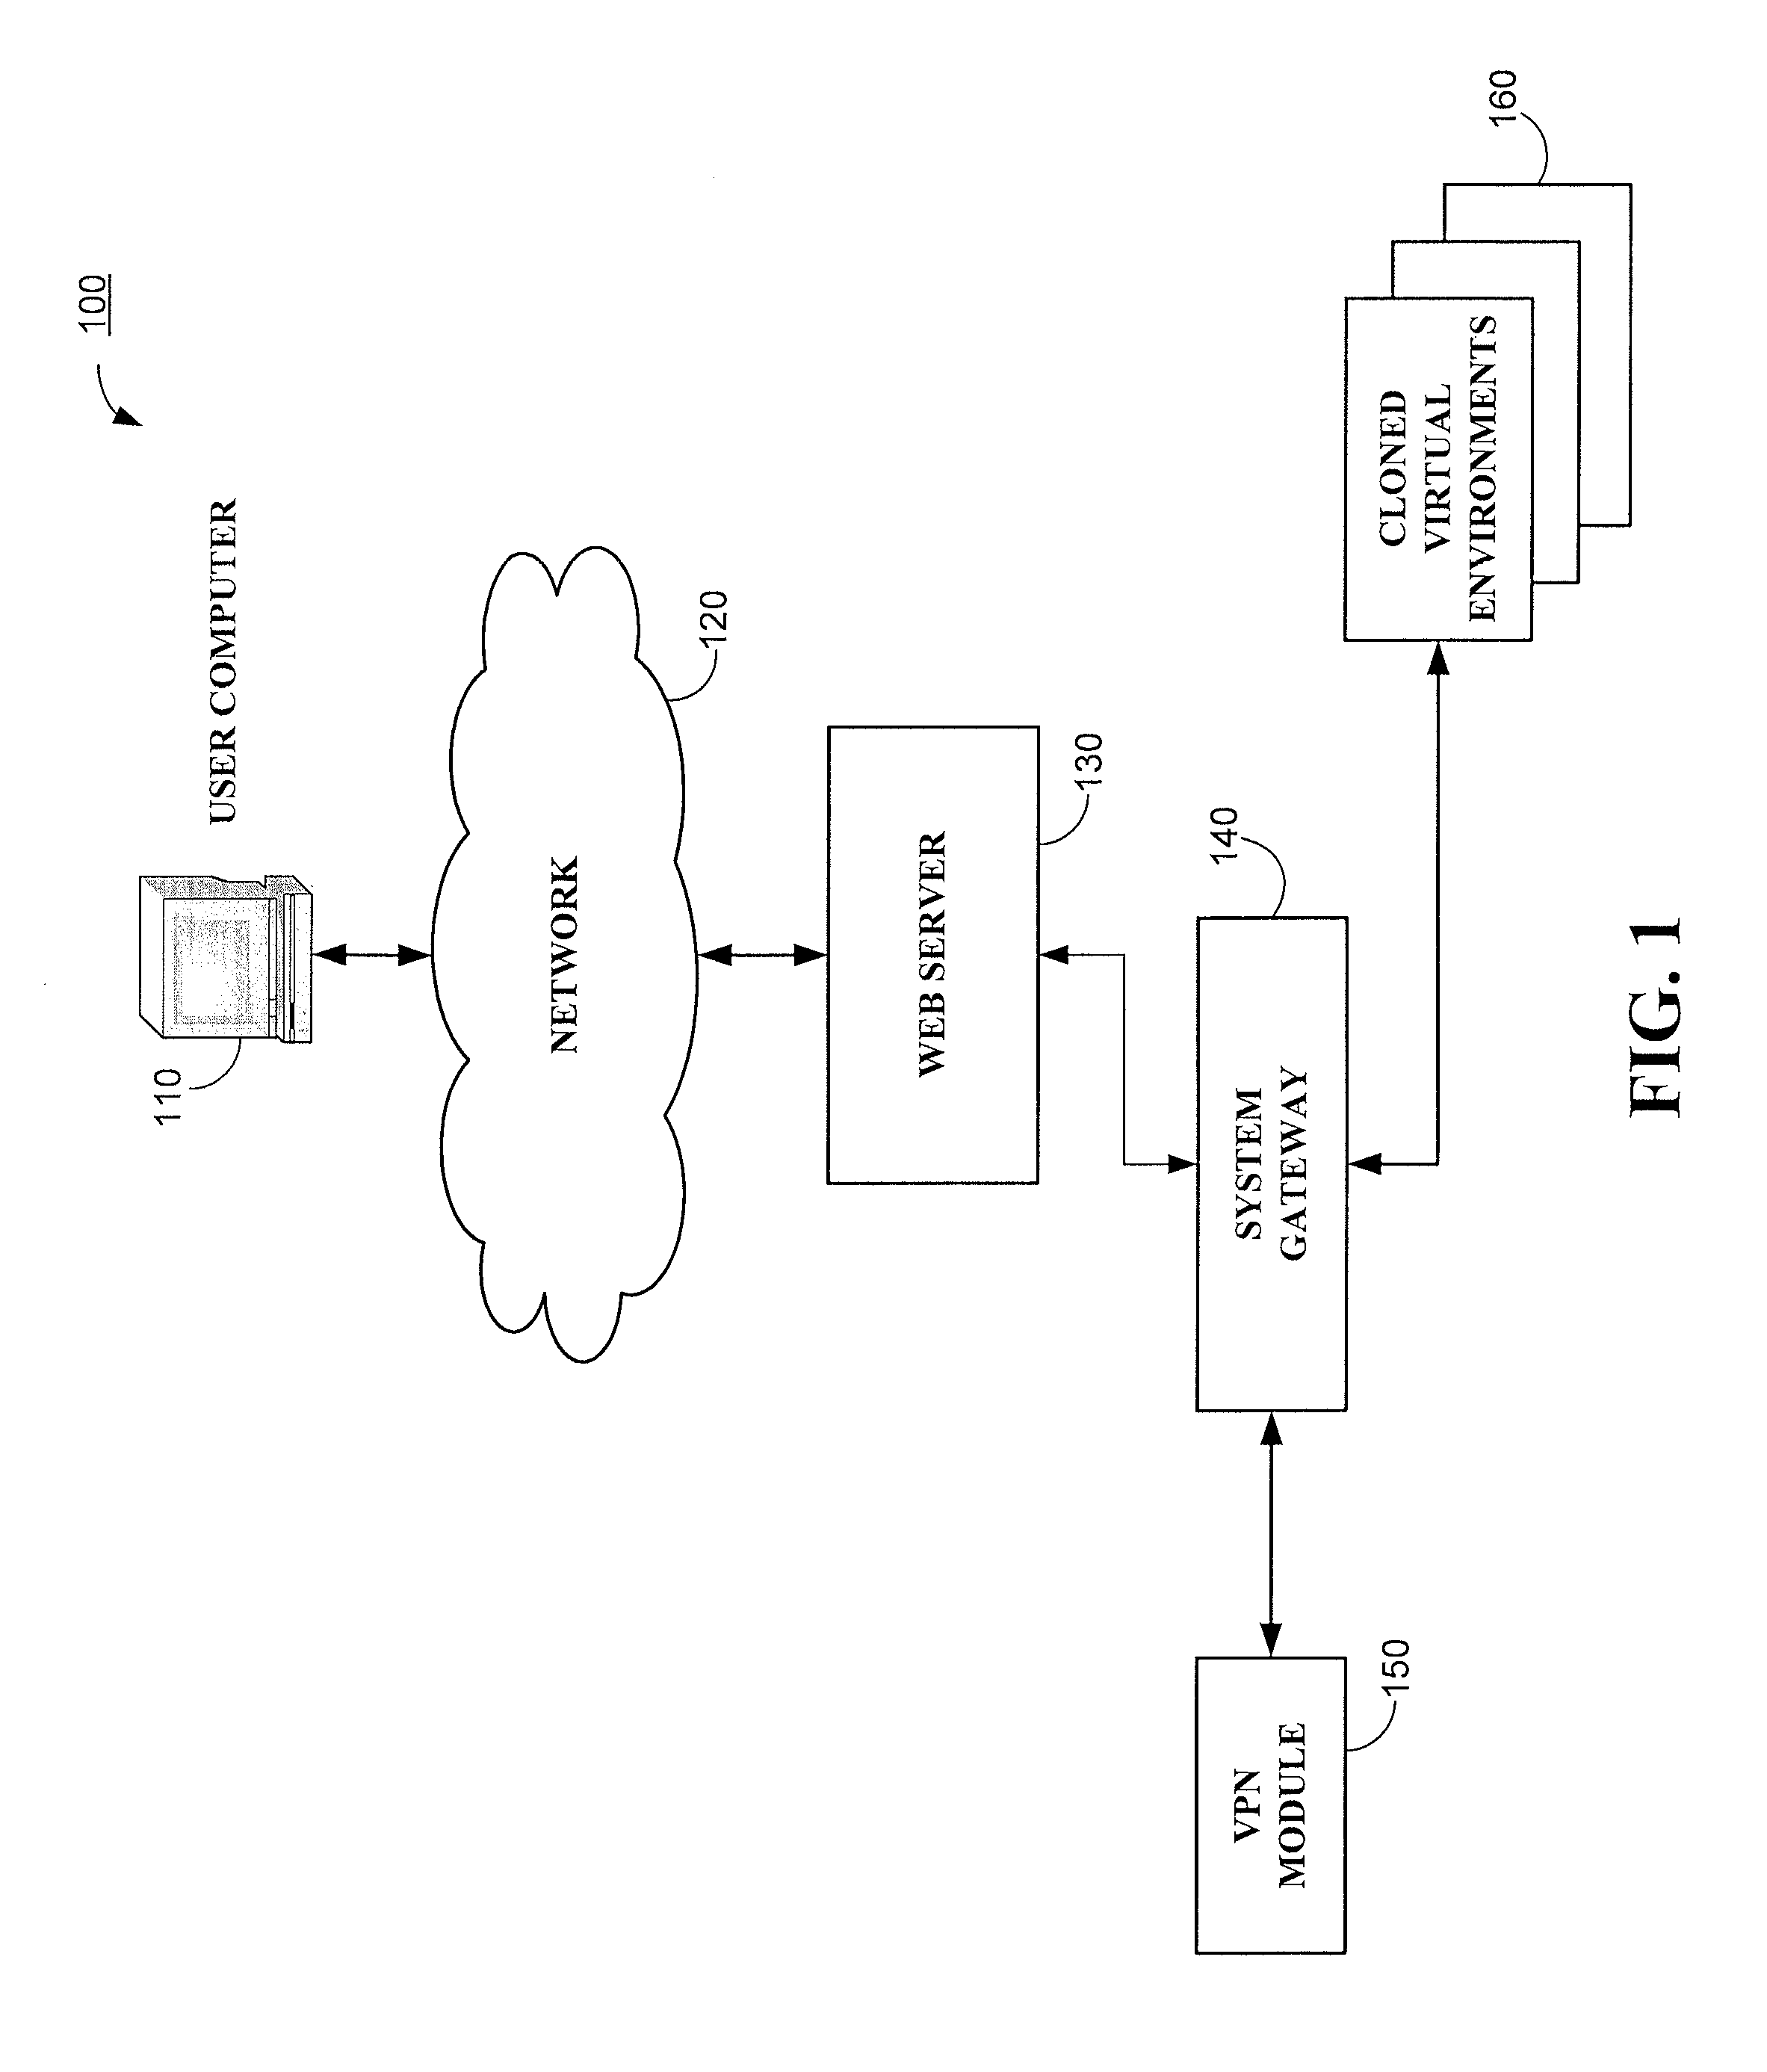 System and method for testing software